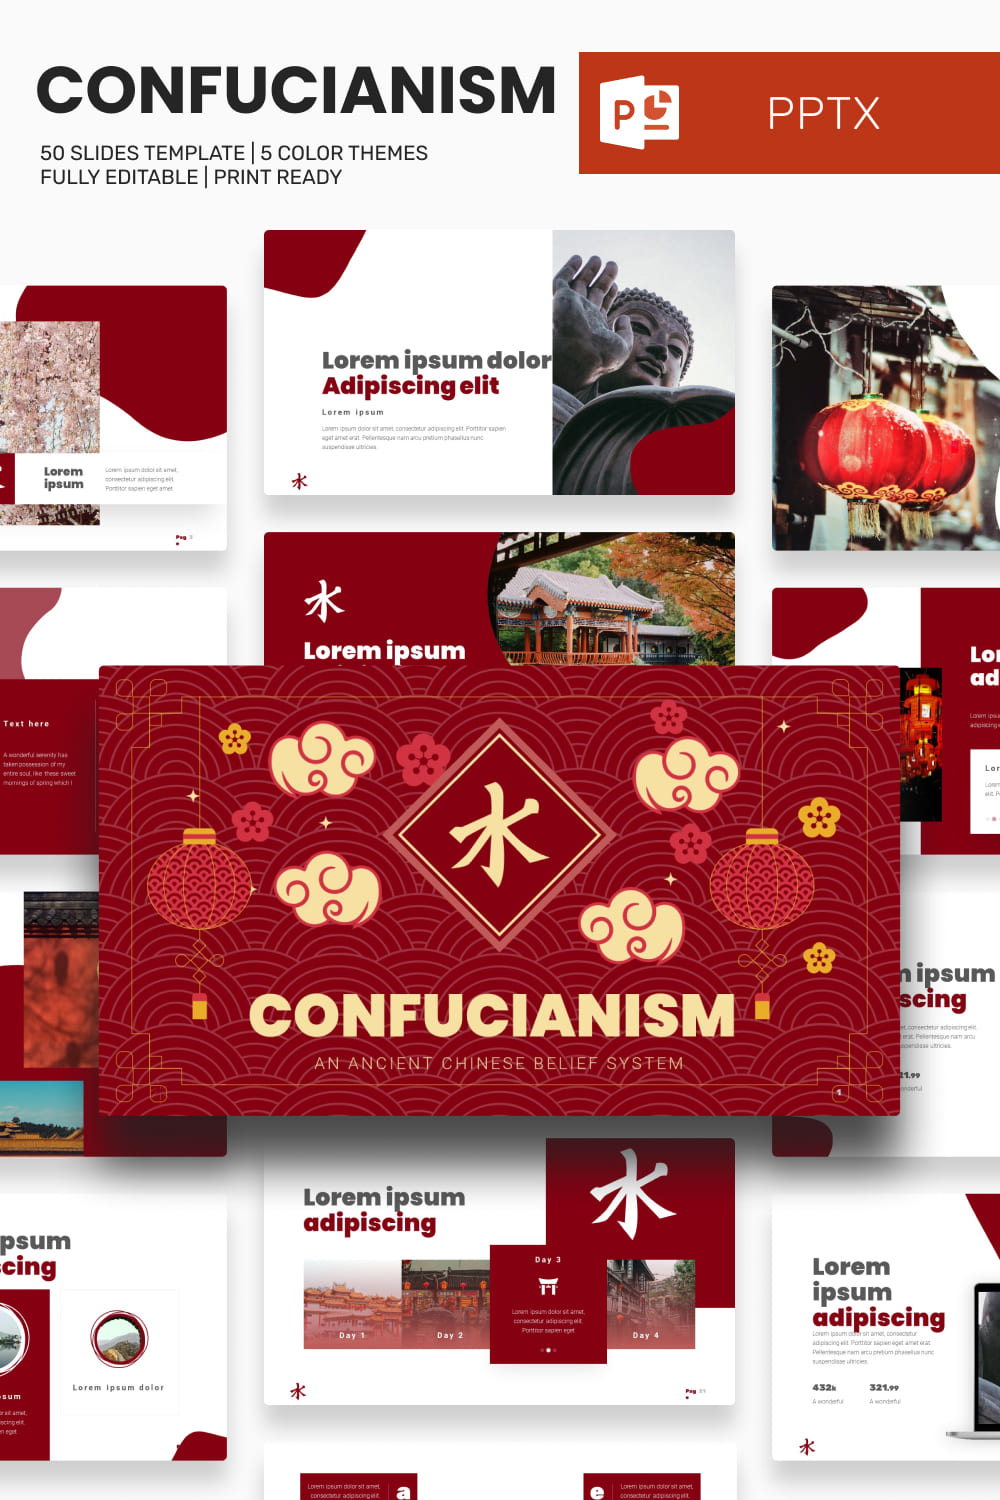 Confucianism Presentation PowerPoint template.